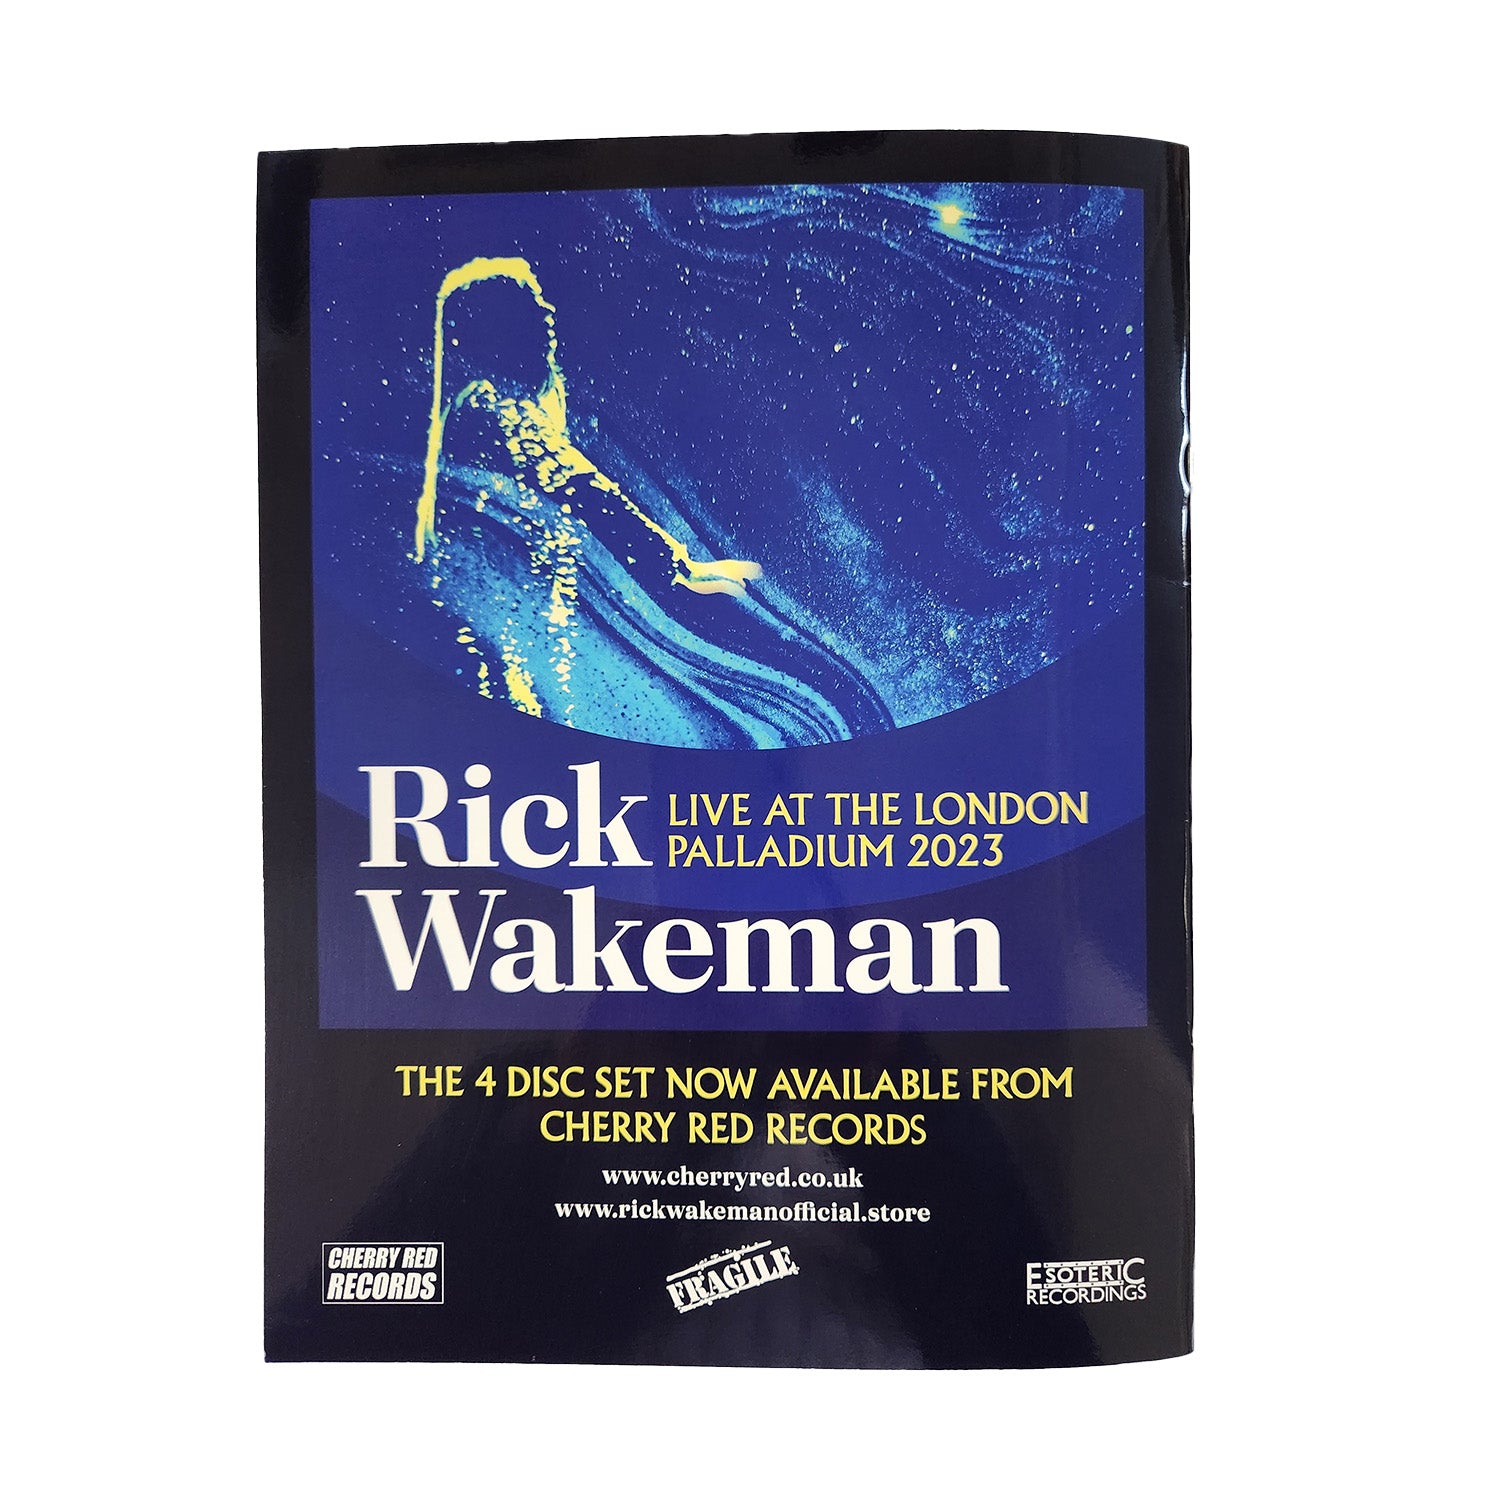 Rick Wakeman - The Official Programme